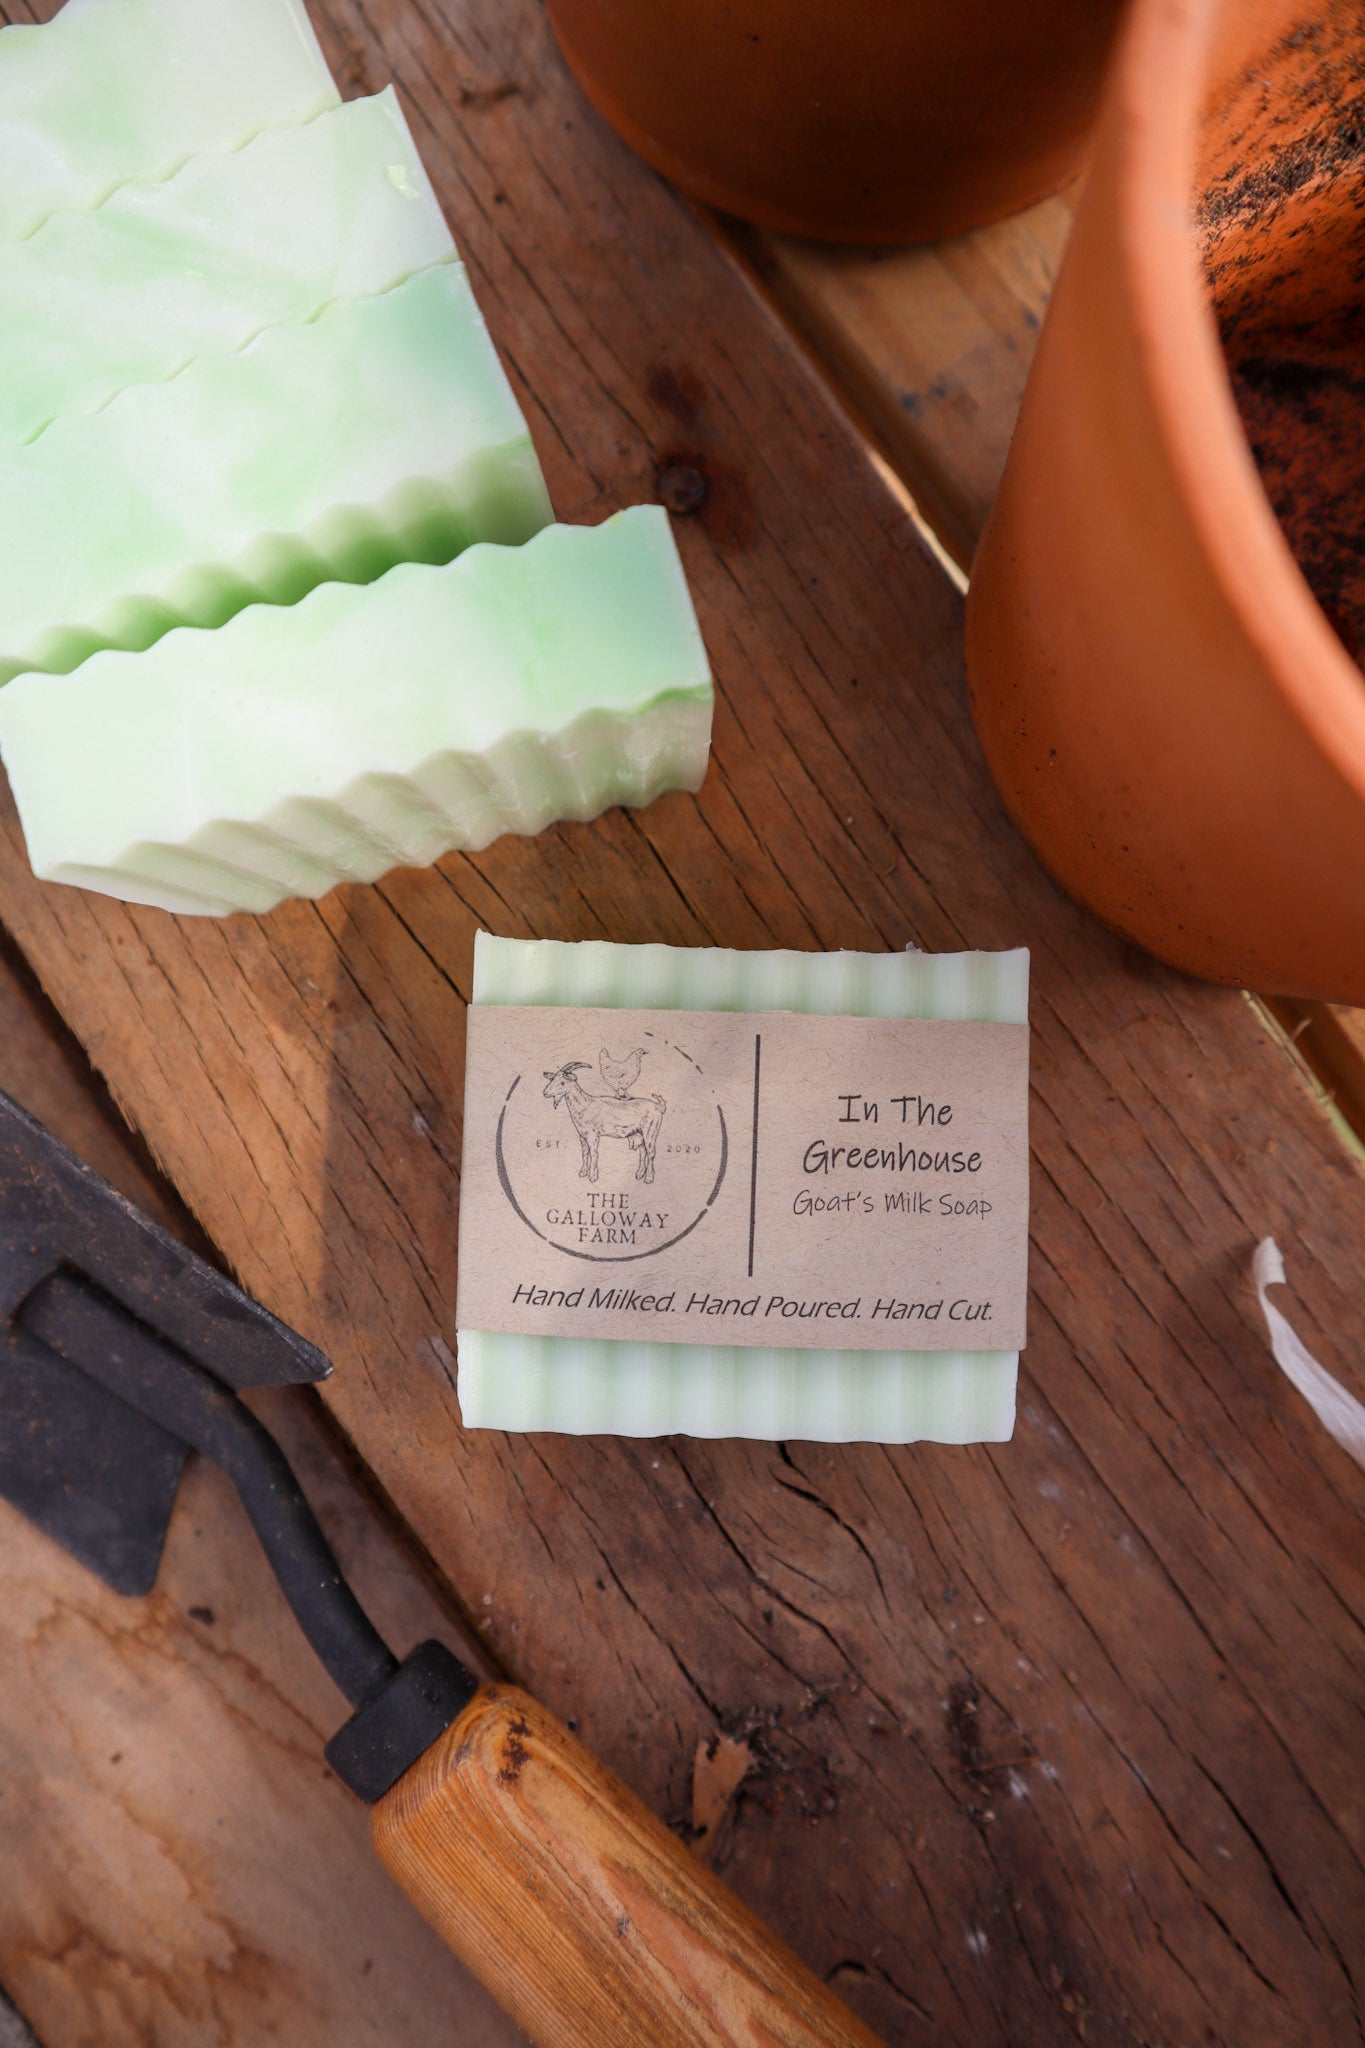 In The Greenhouse Goat's Milk Soap